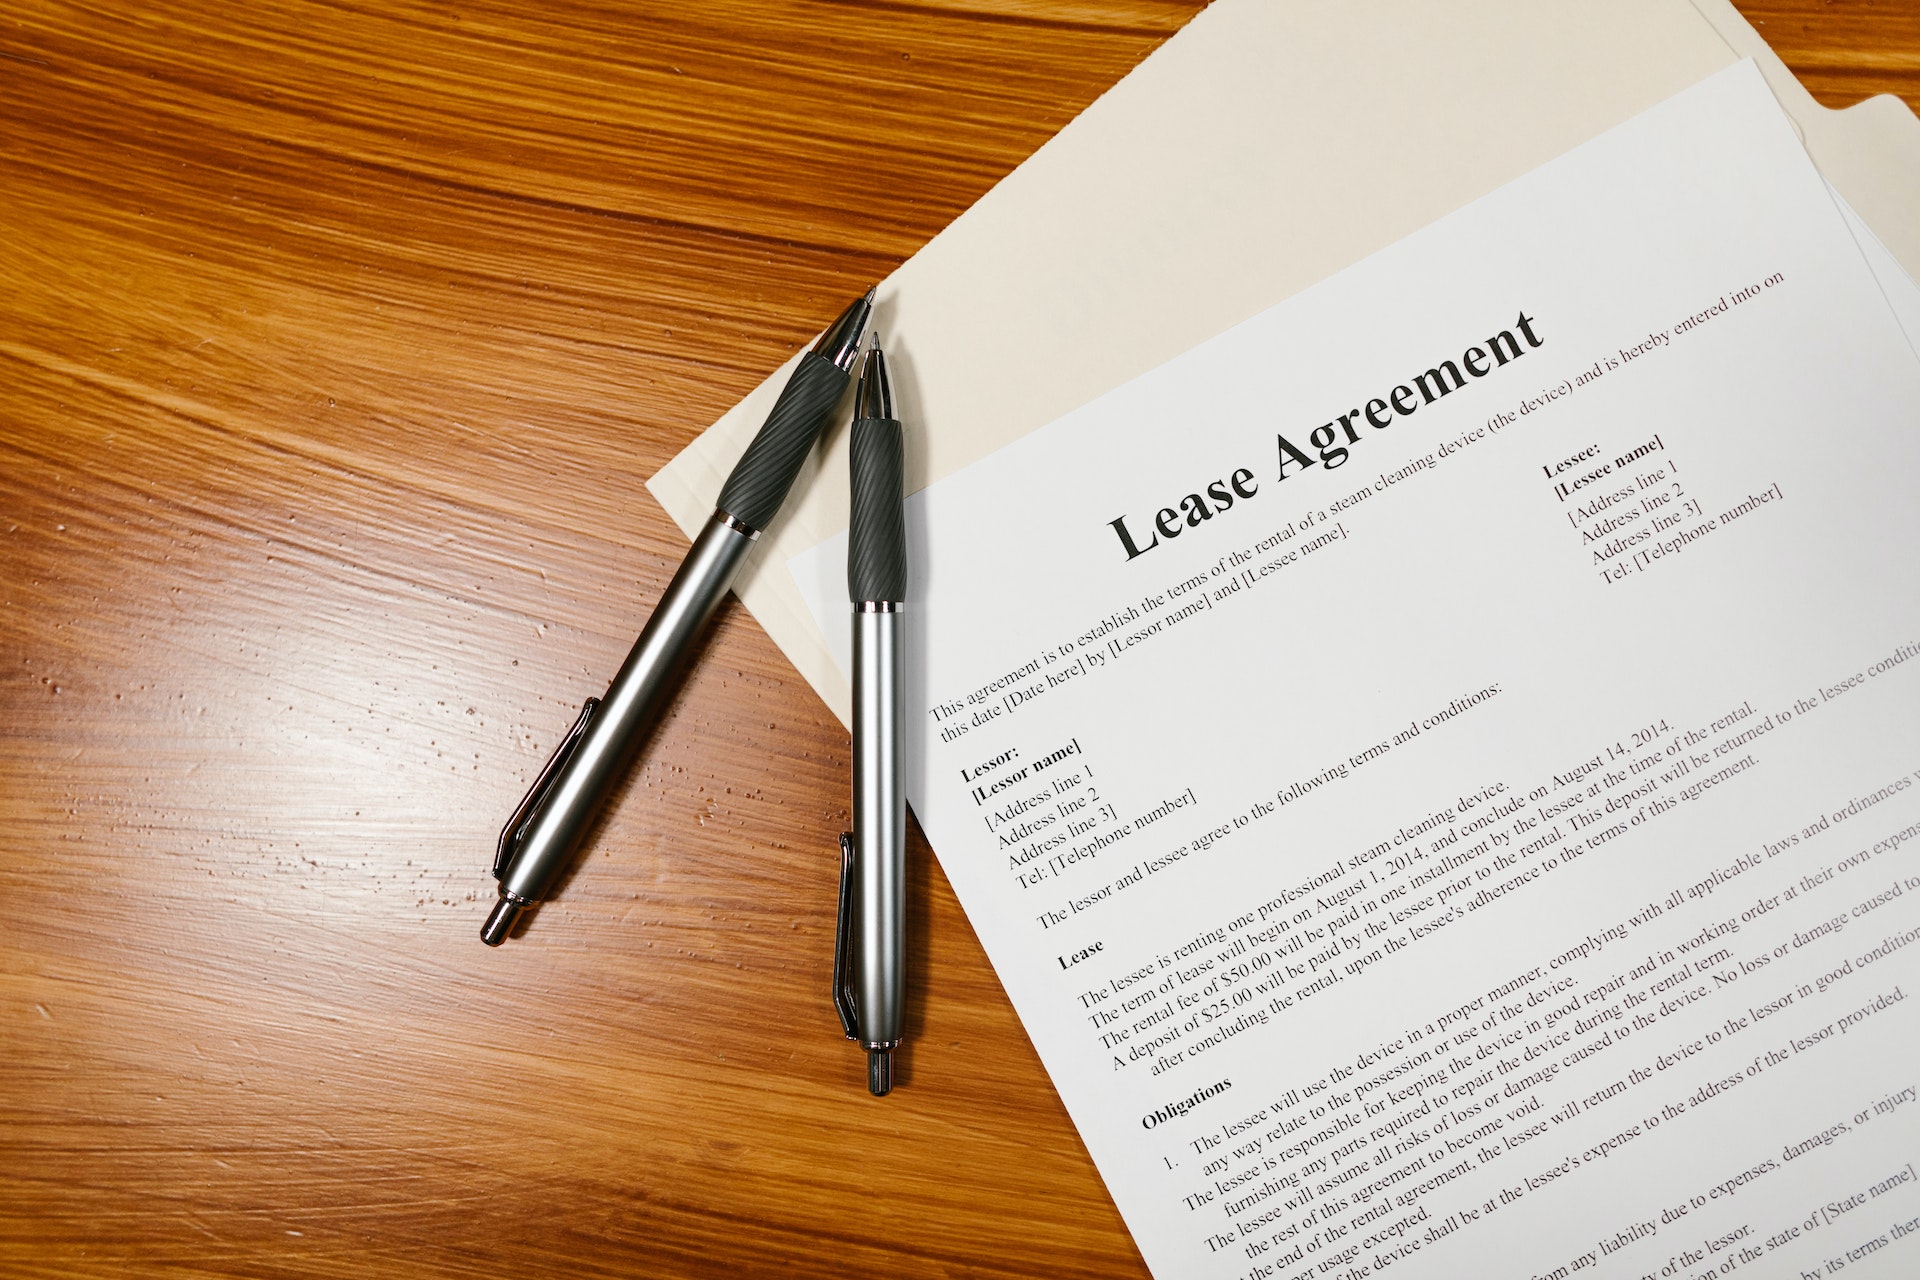 A photo of a lease agreement document on a wooden desk. Two black pens rest on top of the document.